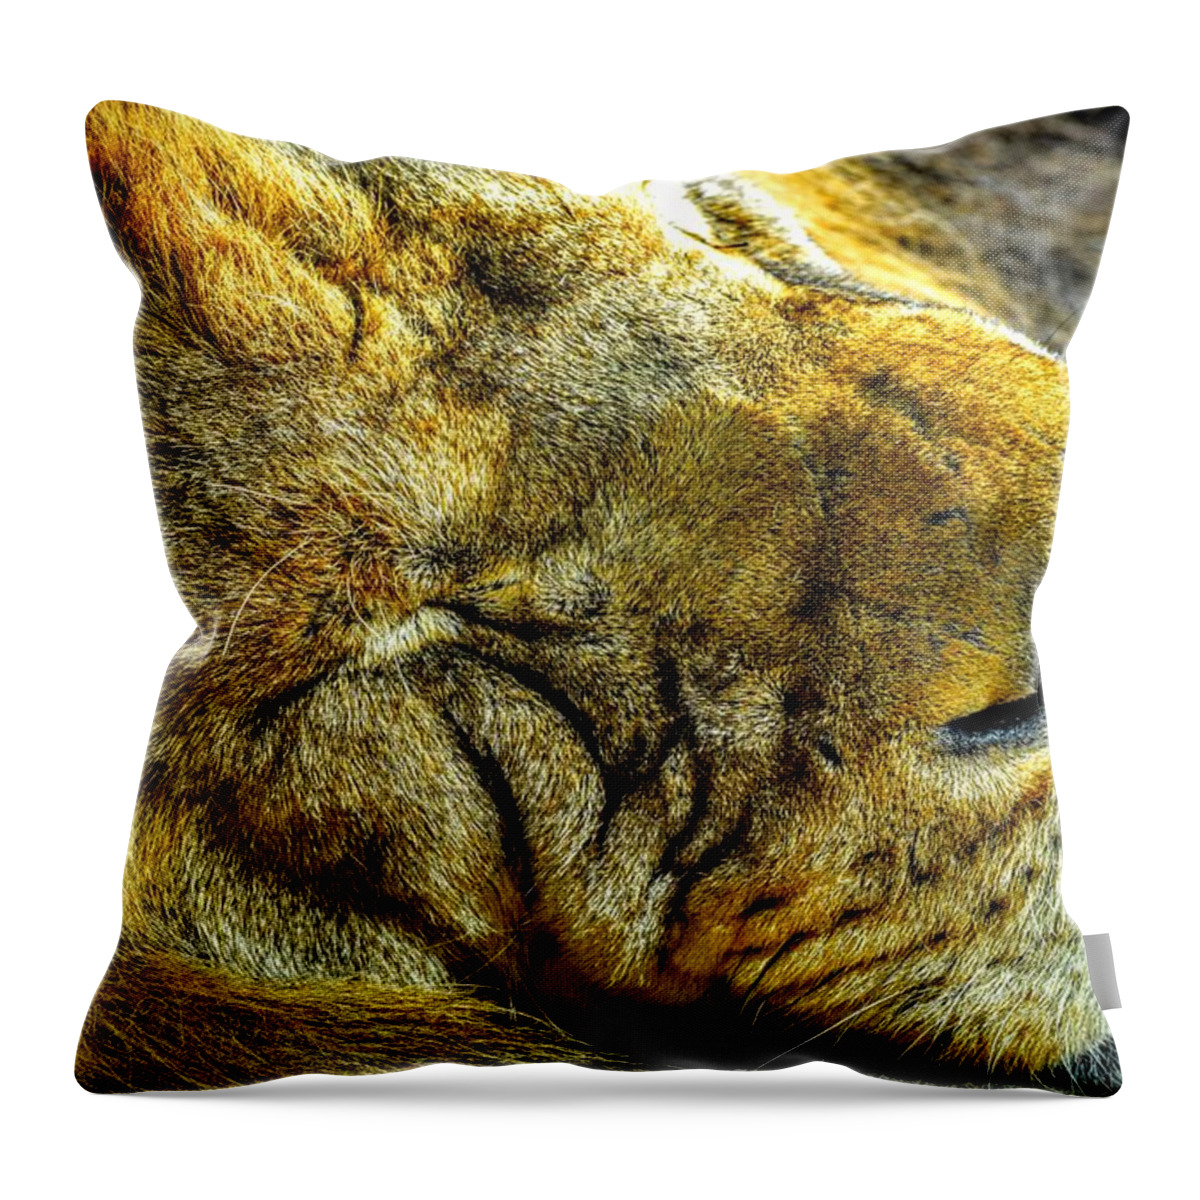 Lion Throw Pillow featuring the photograph Lion Around by Michael Brungardt